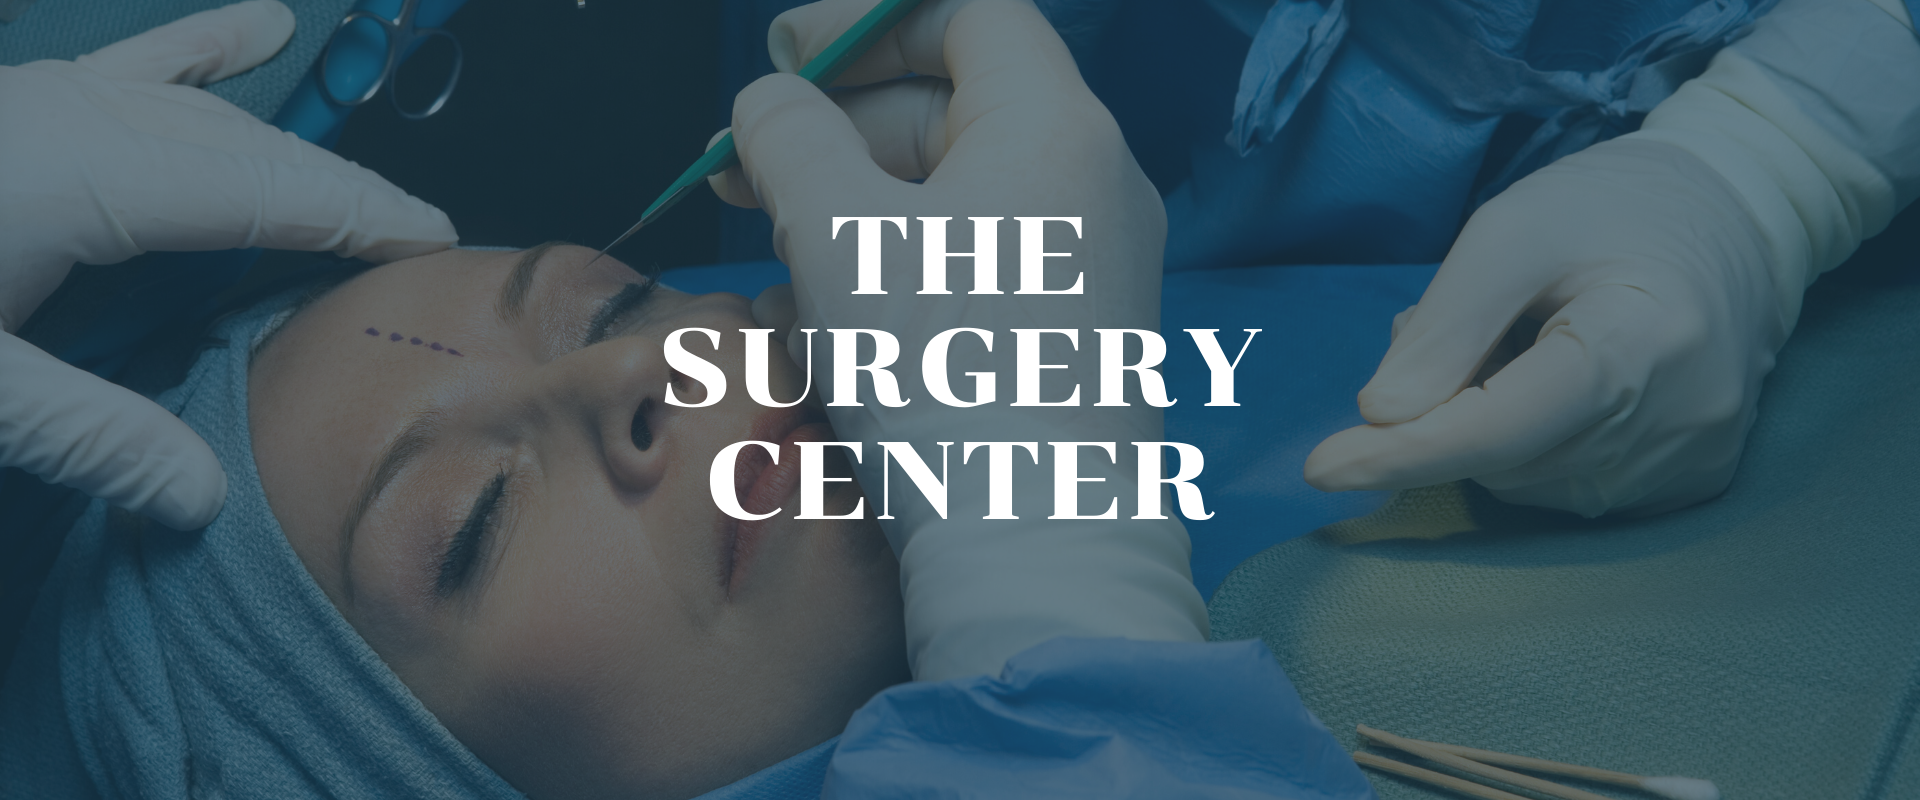 How to choose your cosmetic surgeon